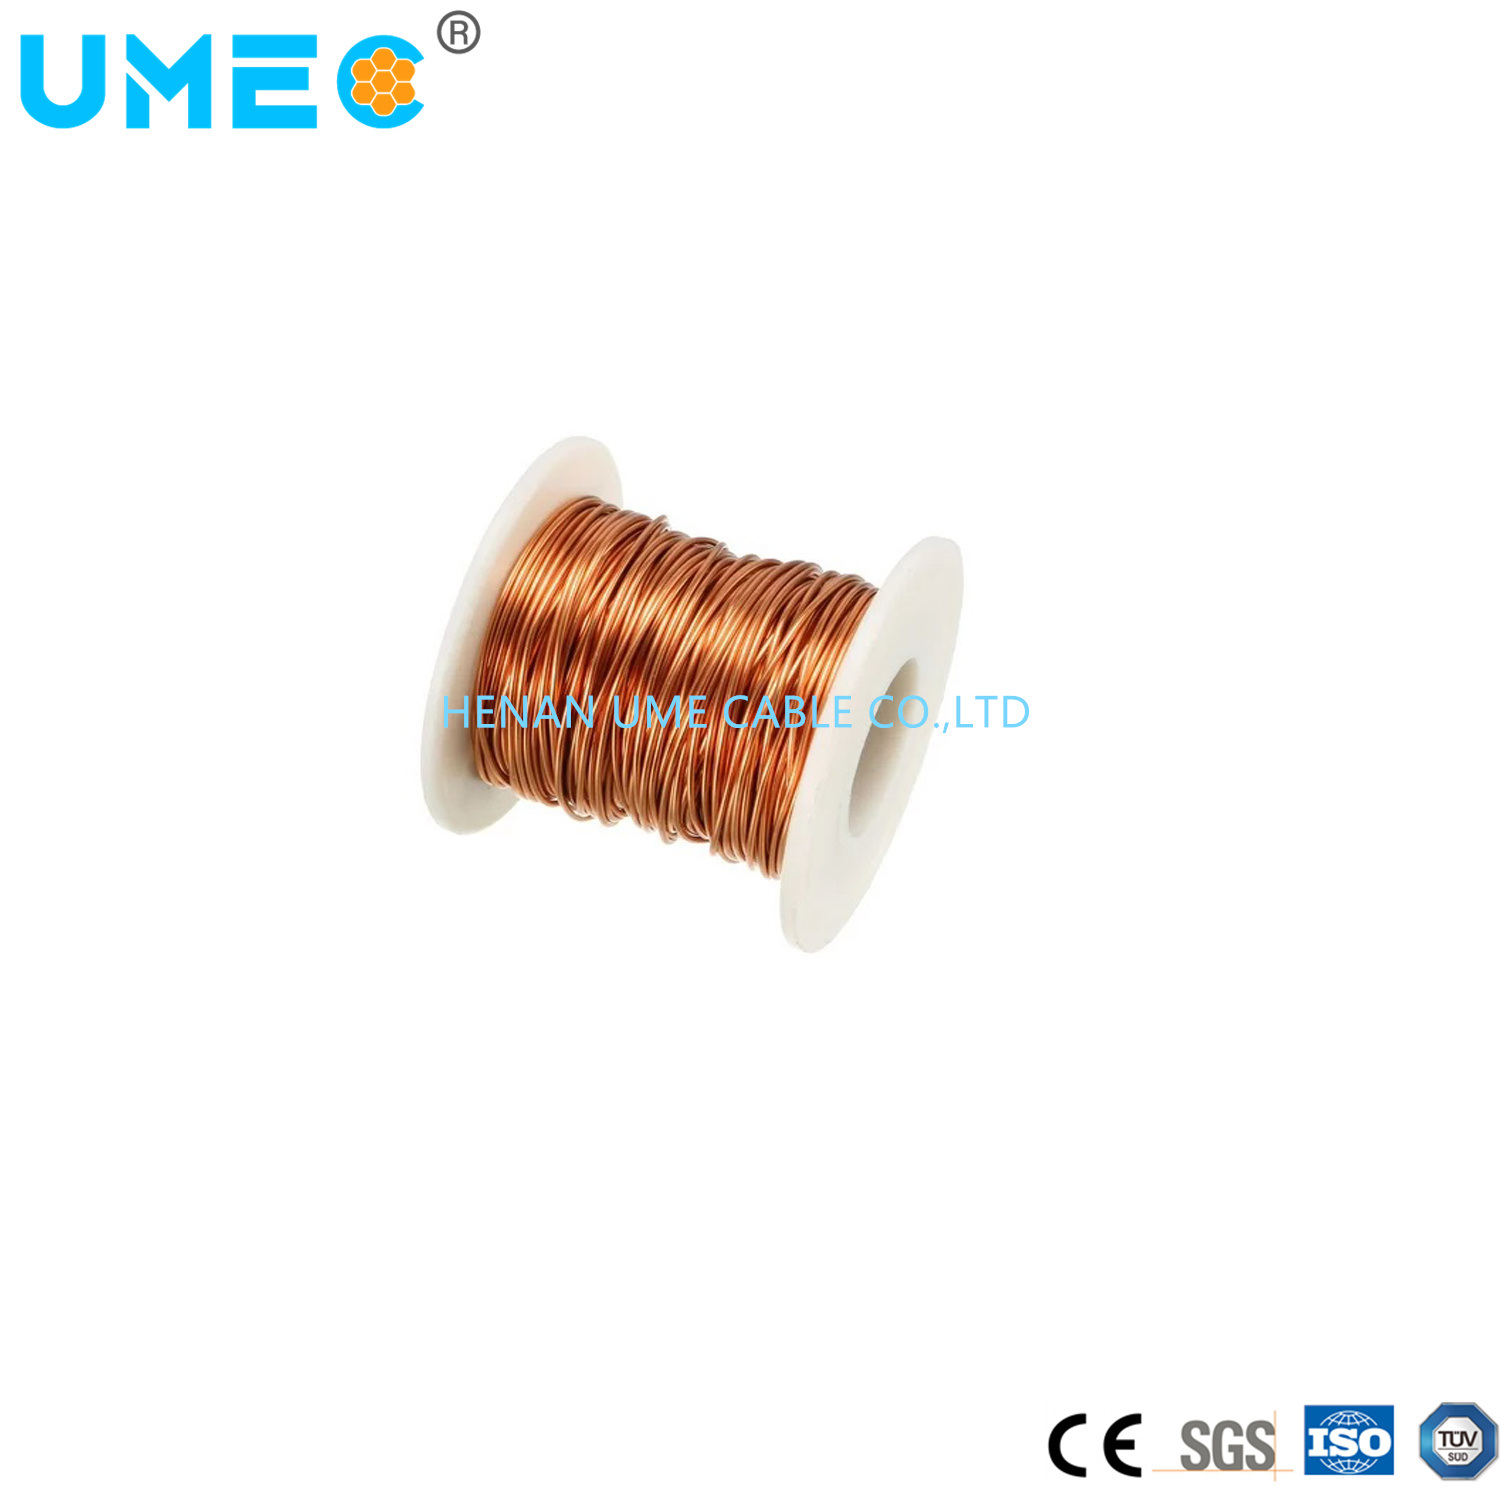 
                Enamedled Winding Wire Used in Automobile Electrical Component Motors, Transformers and Coils
            